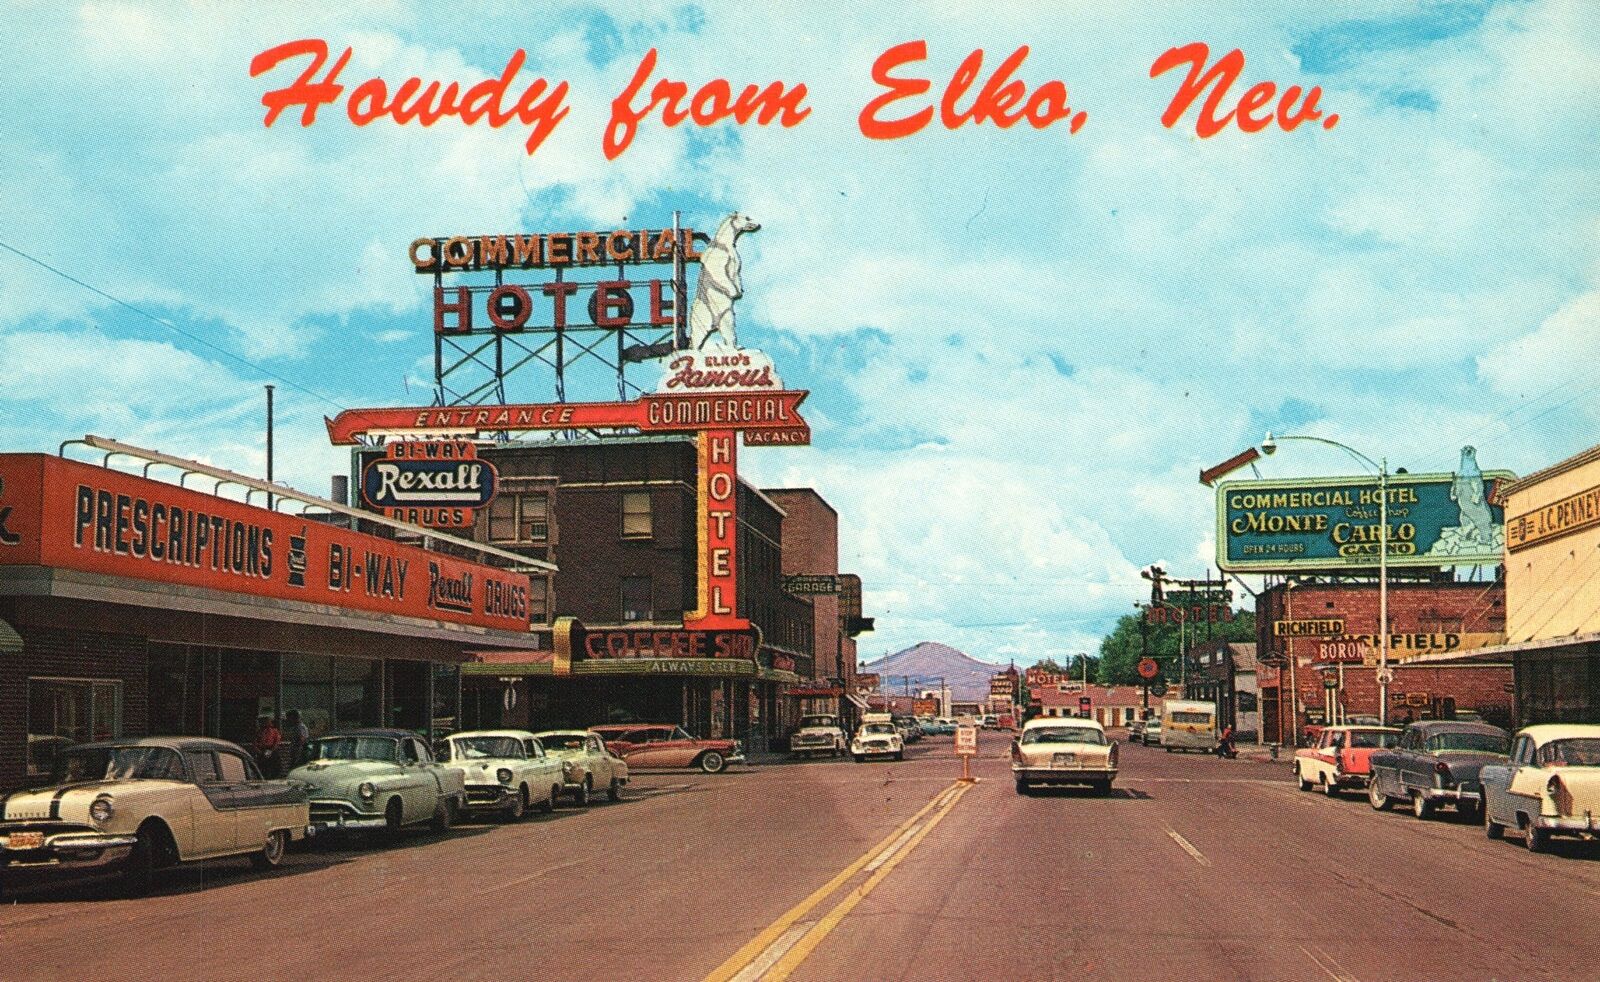 Howdy From Elko Nevada, Commercial Hotel, Rexall Drugs, Cars, Vintage Postcard